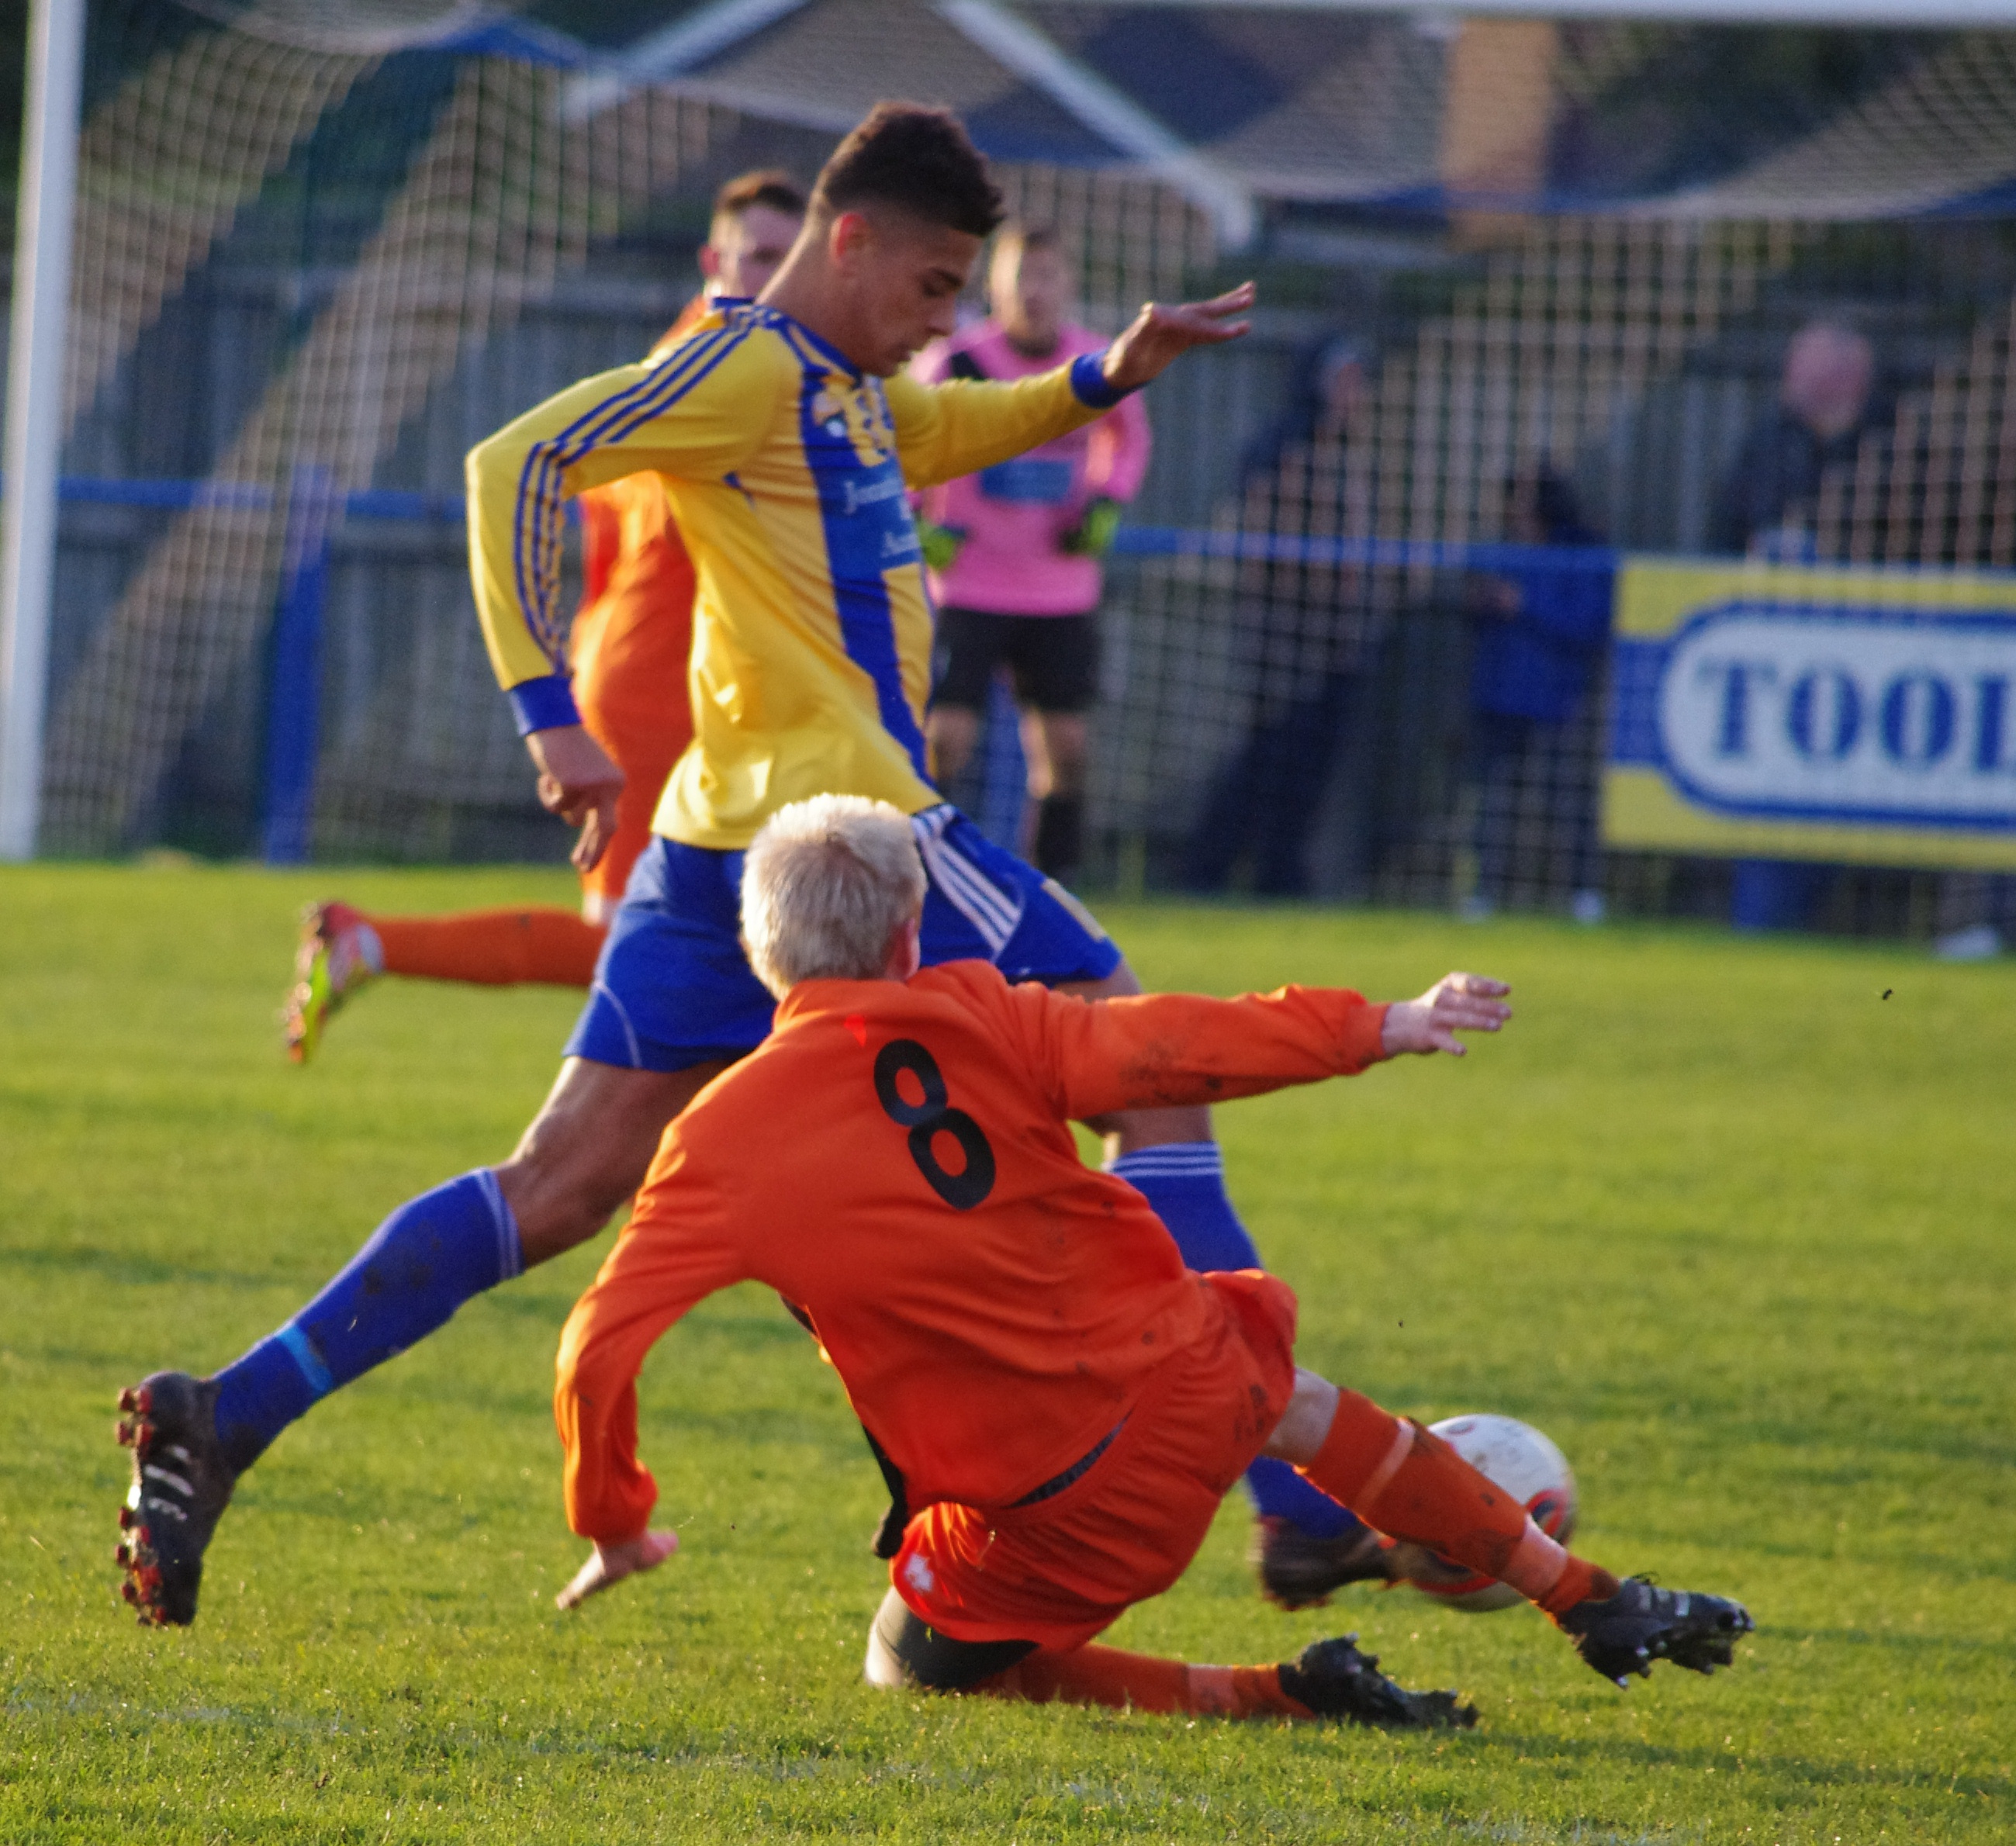 Josh Greenhalgh avoids the tackle from Craig Aspinall